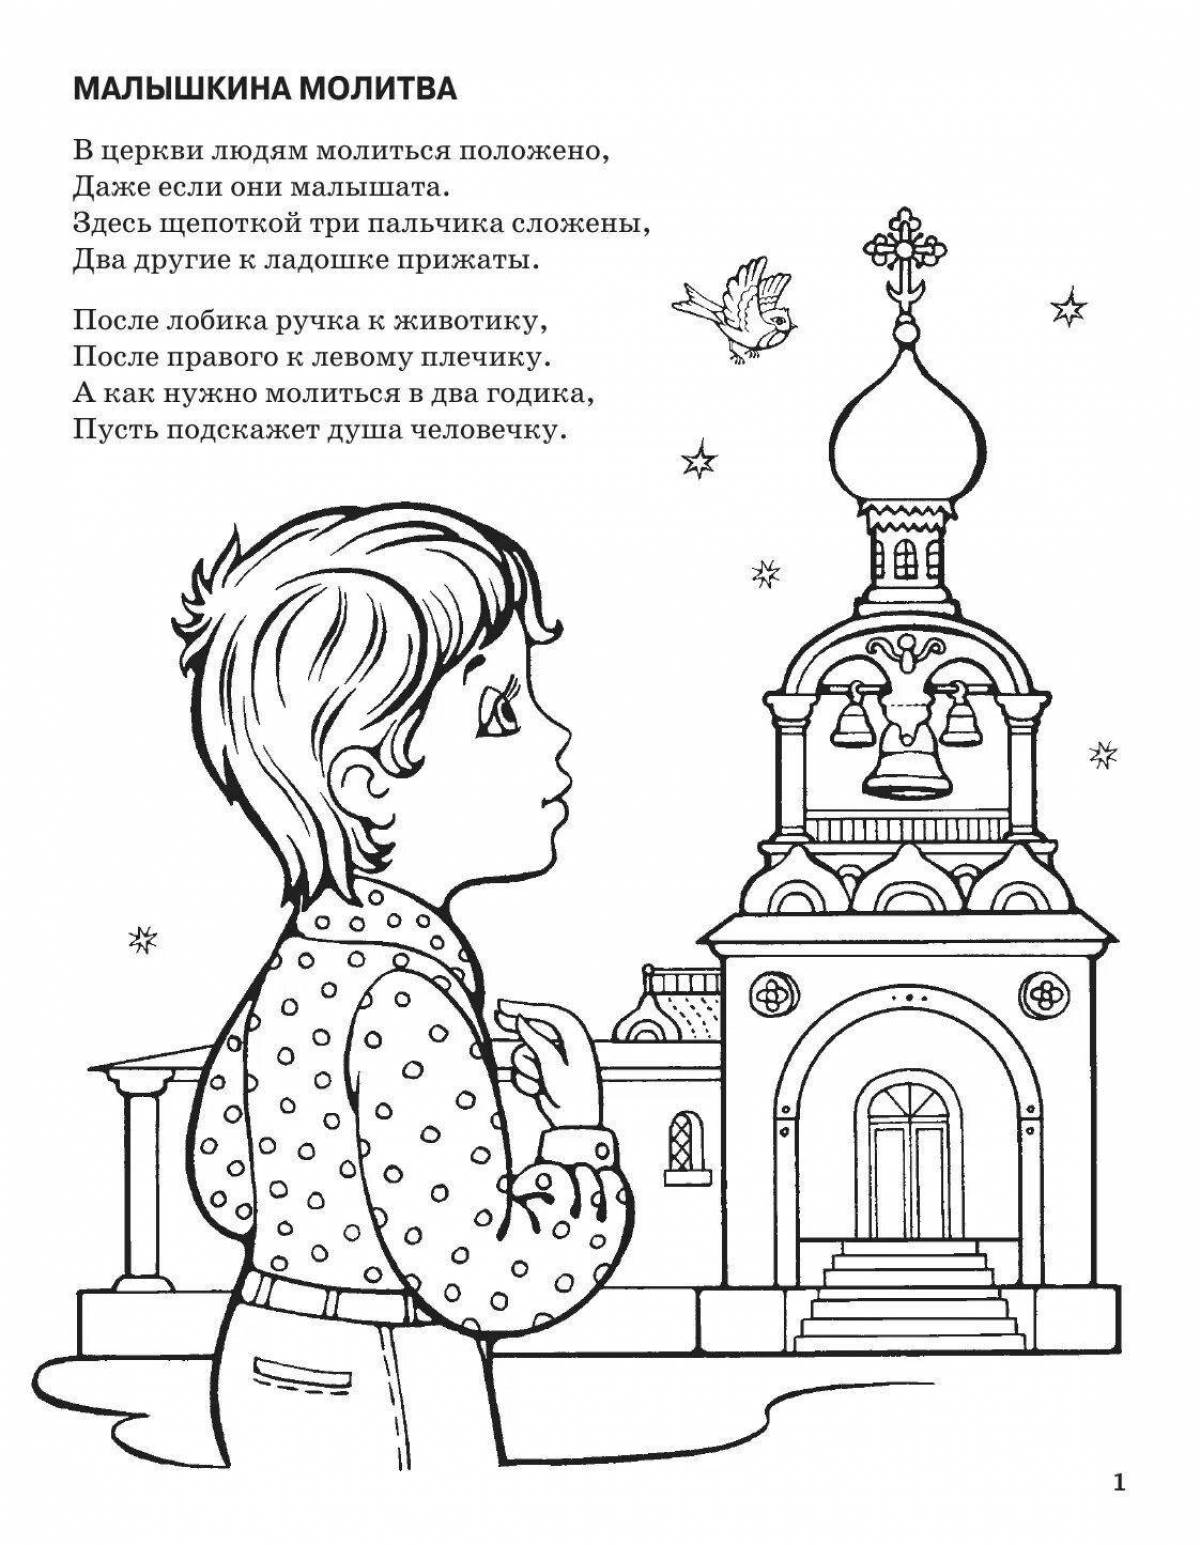 A fascinating Orthodox coloring book for children